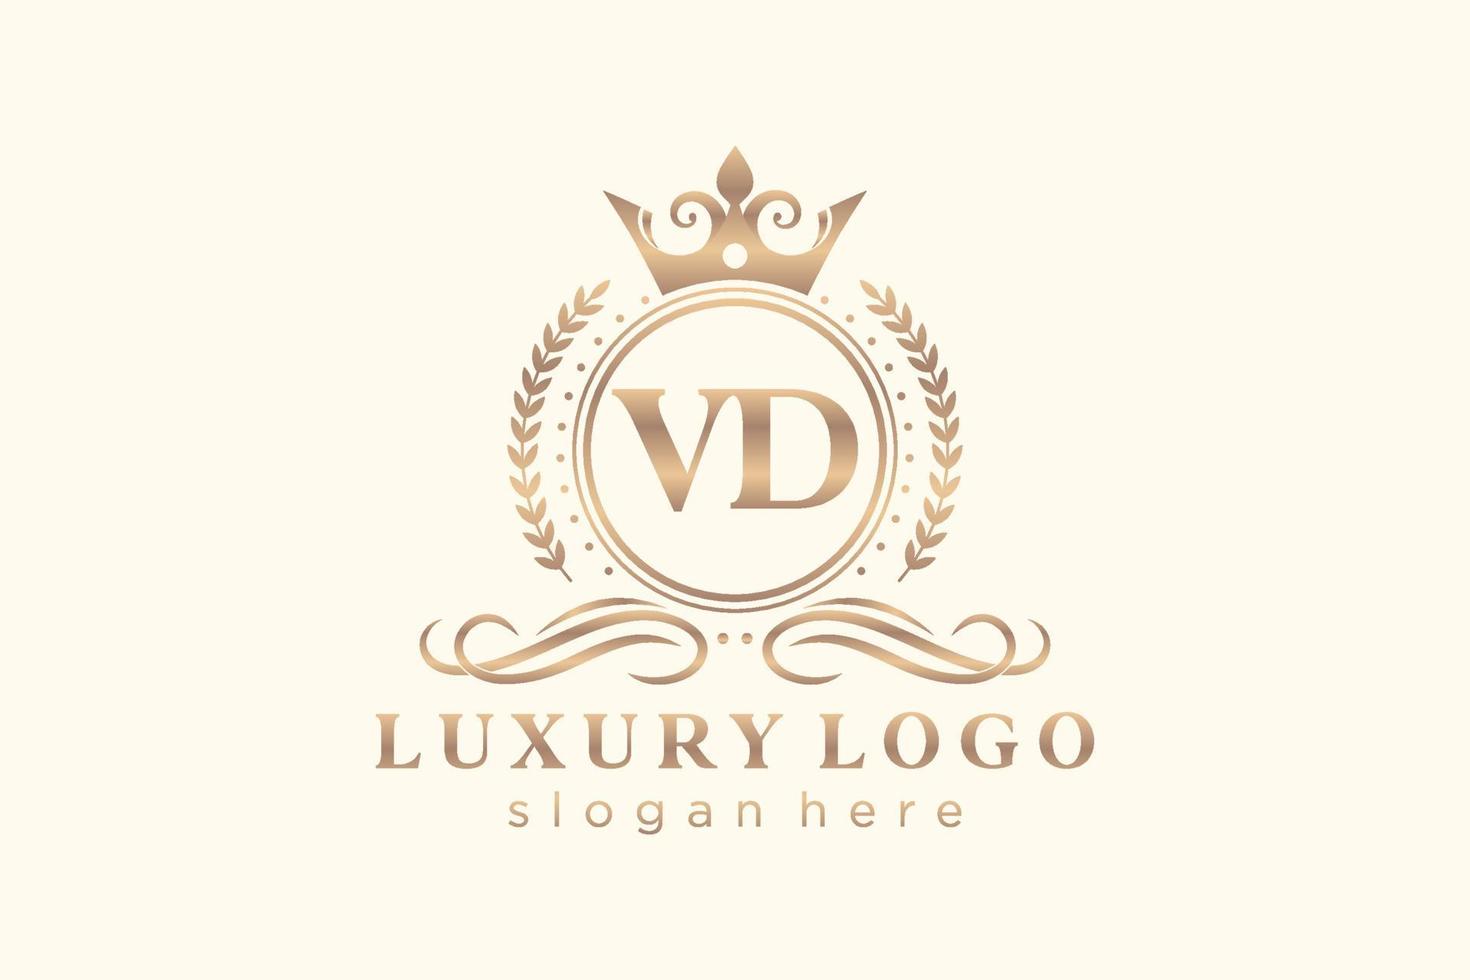 Initial VD Letter Royal Luxury Logo template in vector art for Restaurant, Royalty, Boutique, Cafe, Hotel, Heraldic, Jewelry, Fashion and other vector illustration.